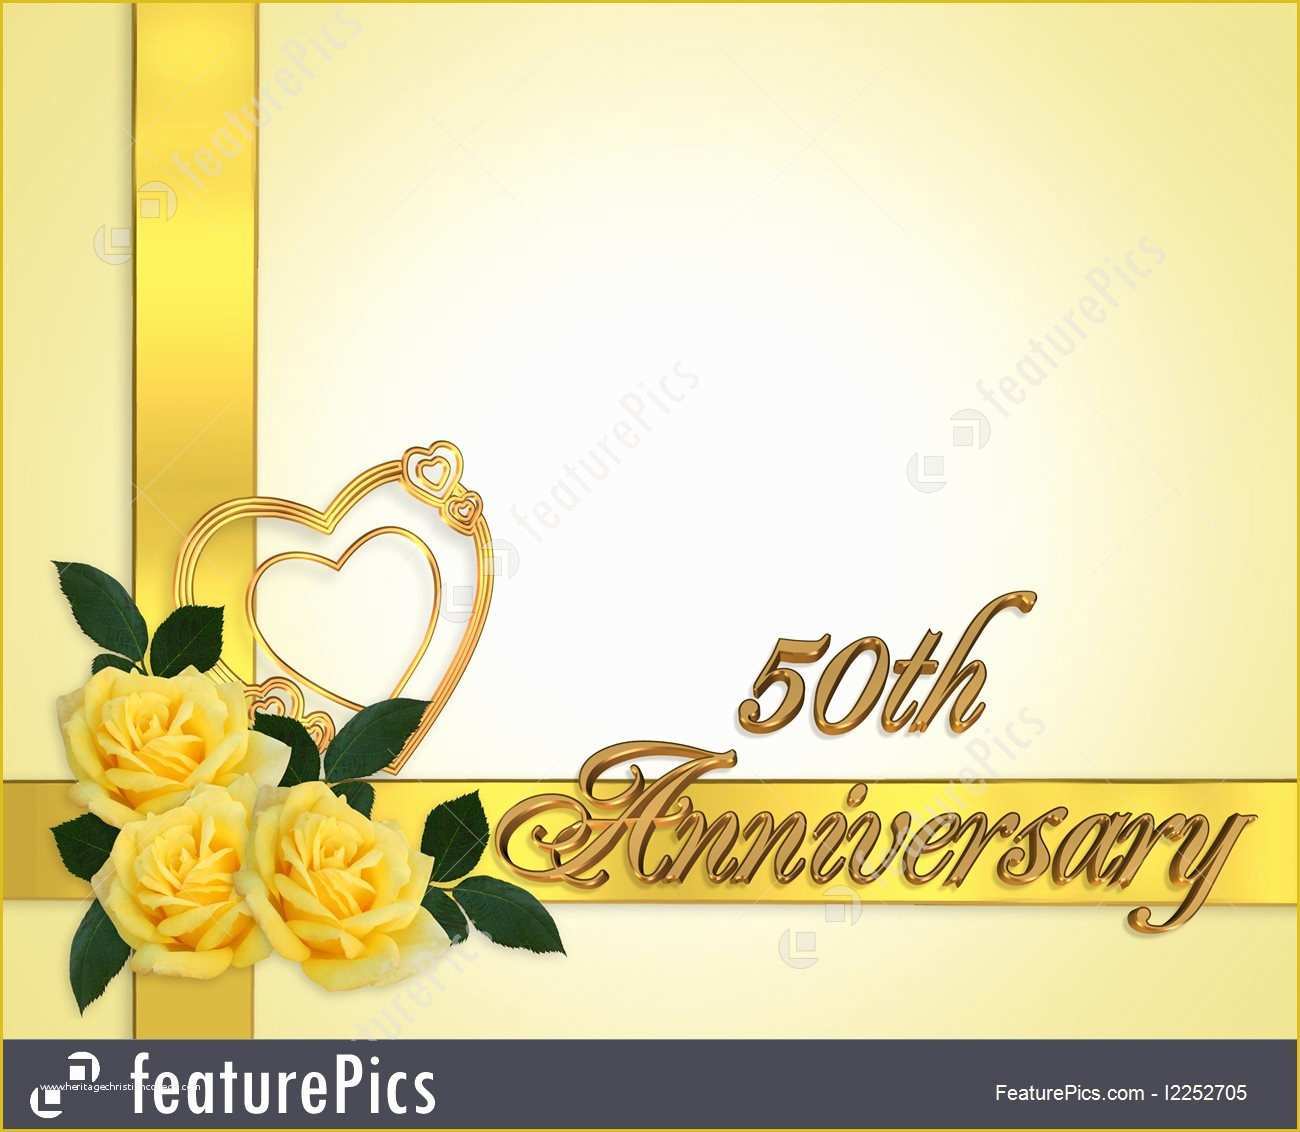 50th Anniversary Templates Free Of Templates Wedding Anniversary 50th Background Stock